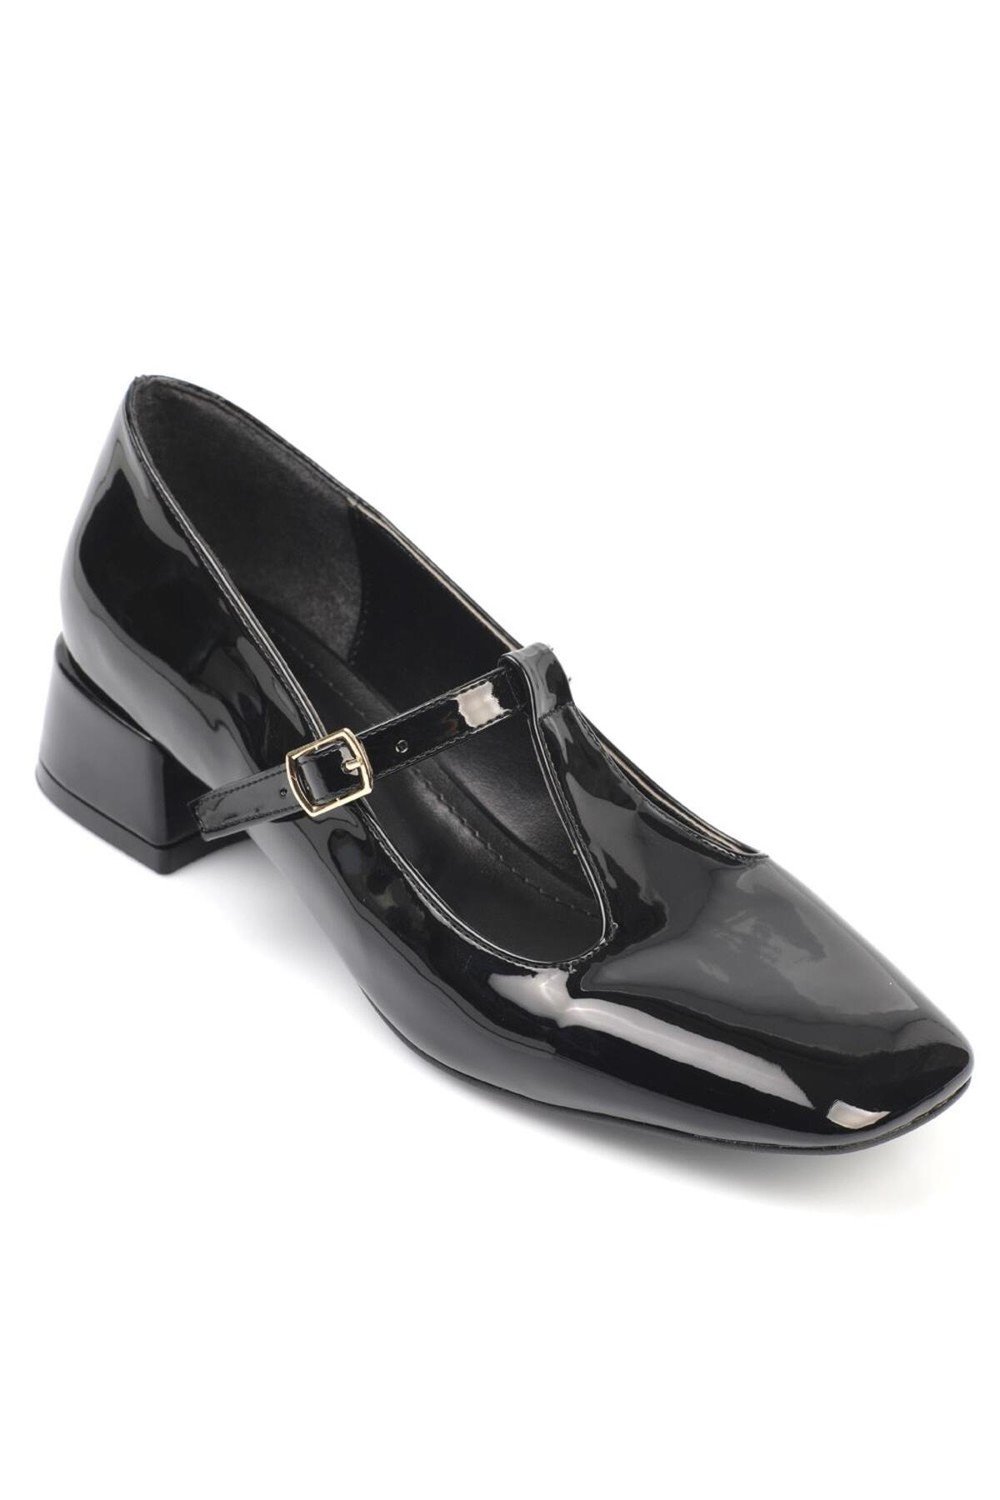 Capone Outfitters Capone Flat Toe Women's T-Strap Low Heel Shoes